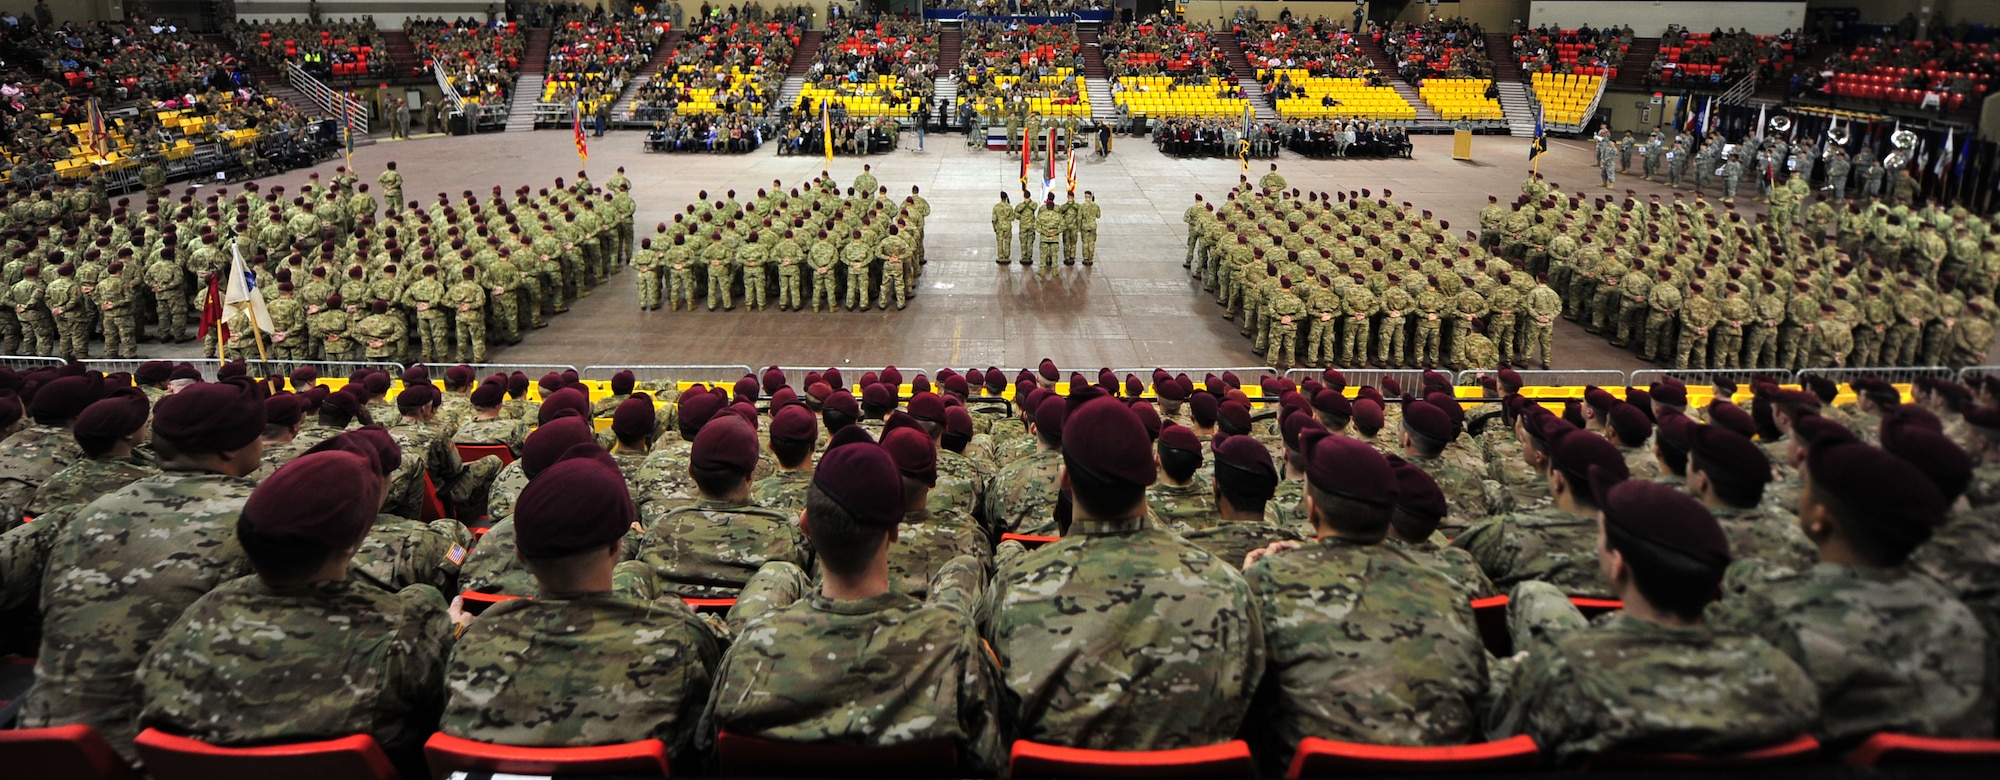 Soldiers from 4th Brigade Combat Team (Airborne), 25th Infantry Division participate on their deployment ceremony at Sullivan Arena, Anchorage, Alaska, Nov. 29, 2011. The 4-25 ABCT "Spartan Brigade" will deploy 3,500 Soldiers on a series of flights in November and December en route to Afghanistan. (U.S. Air Force photo/Staff Sgt. Sheila deVera)